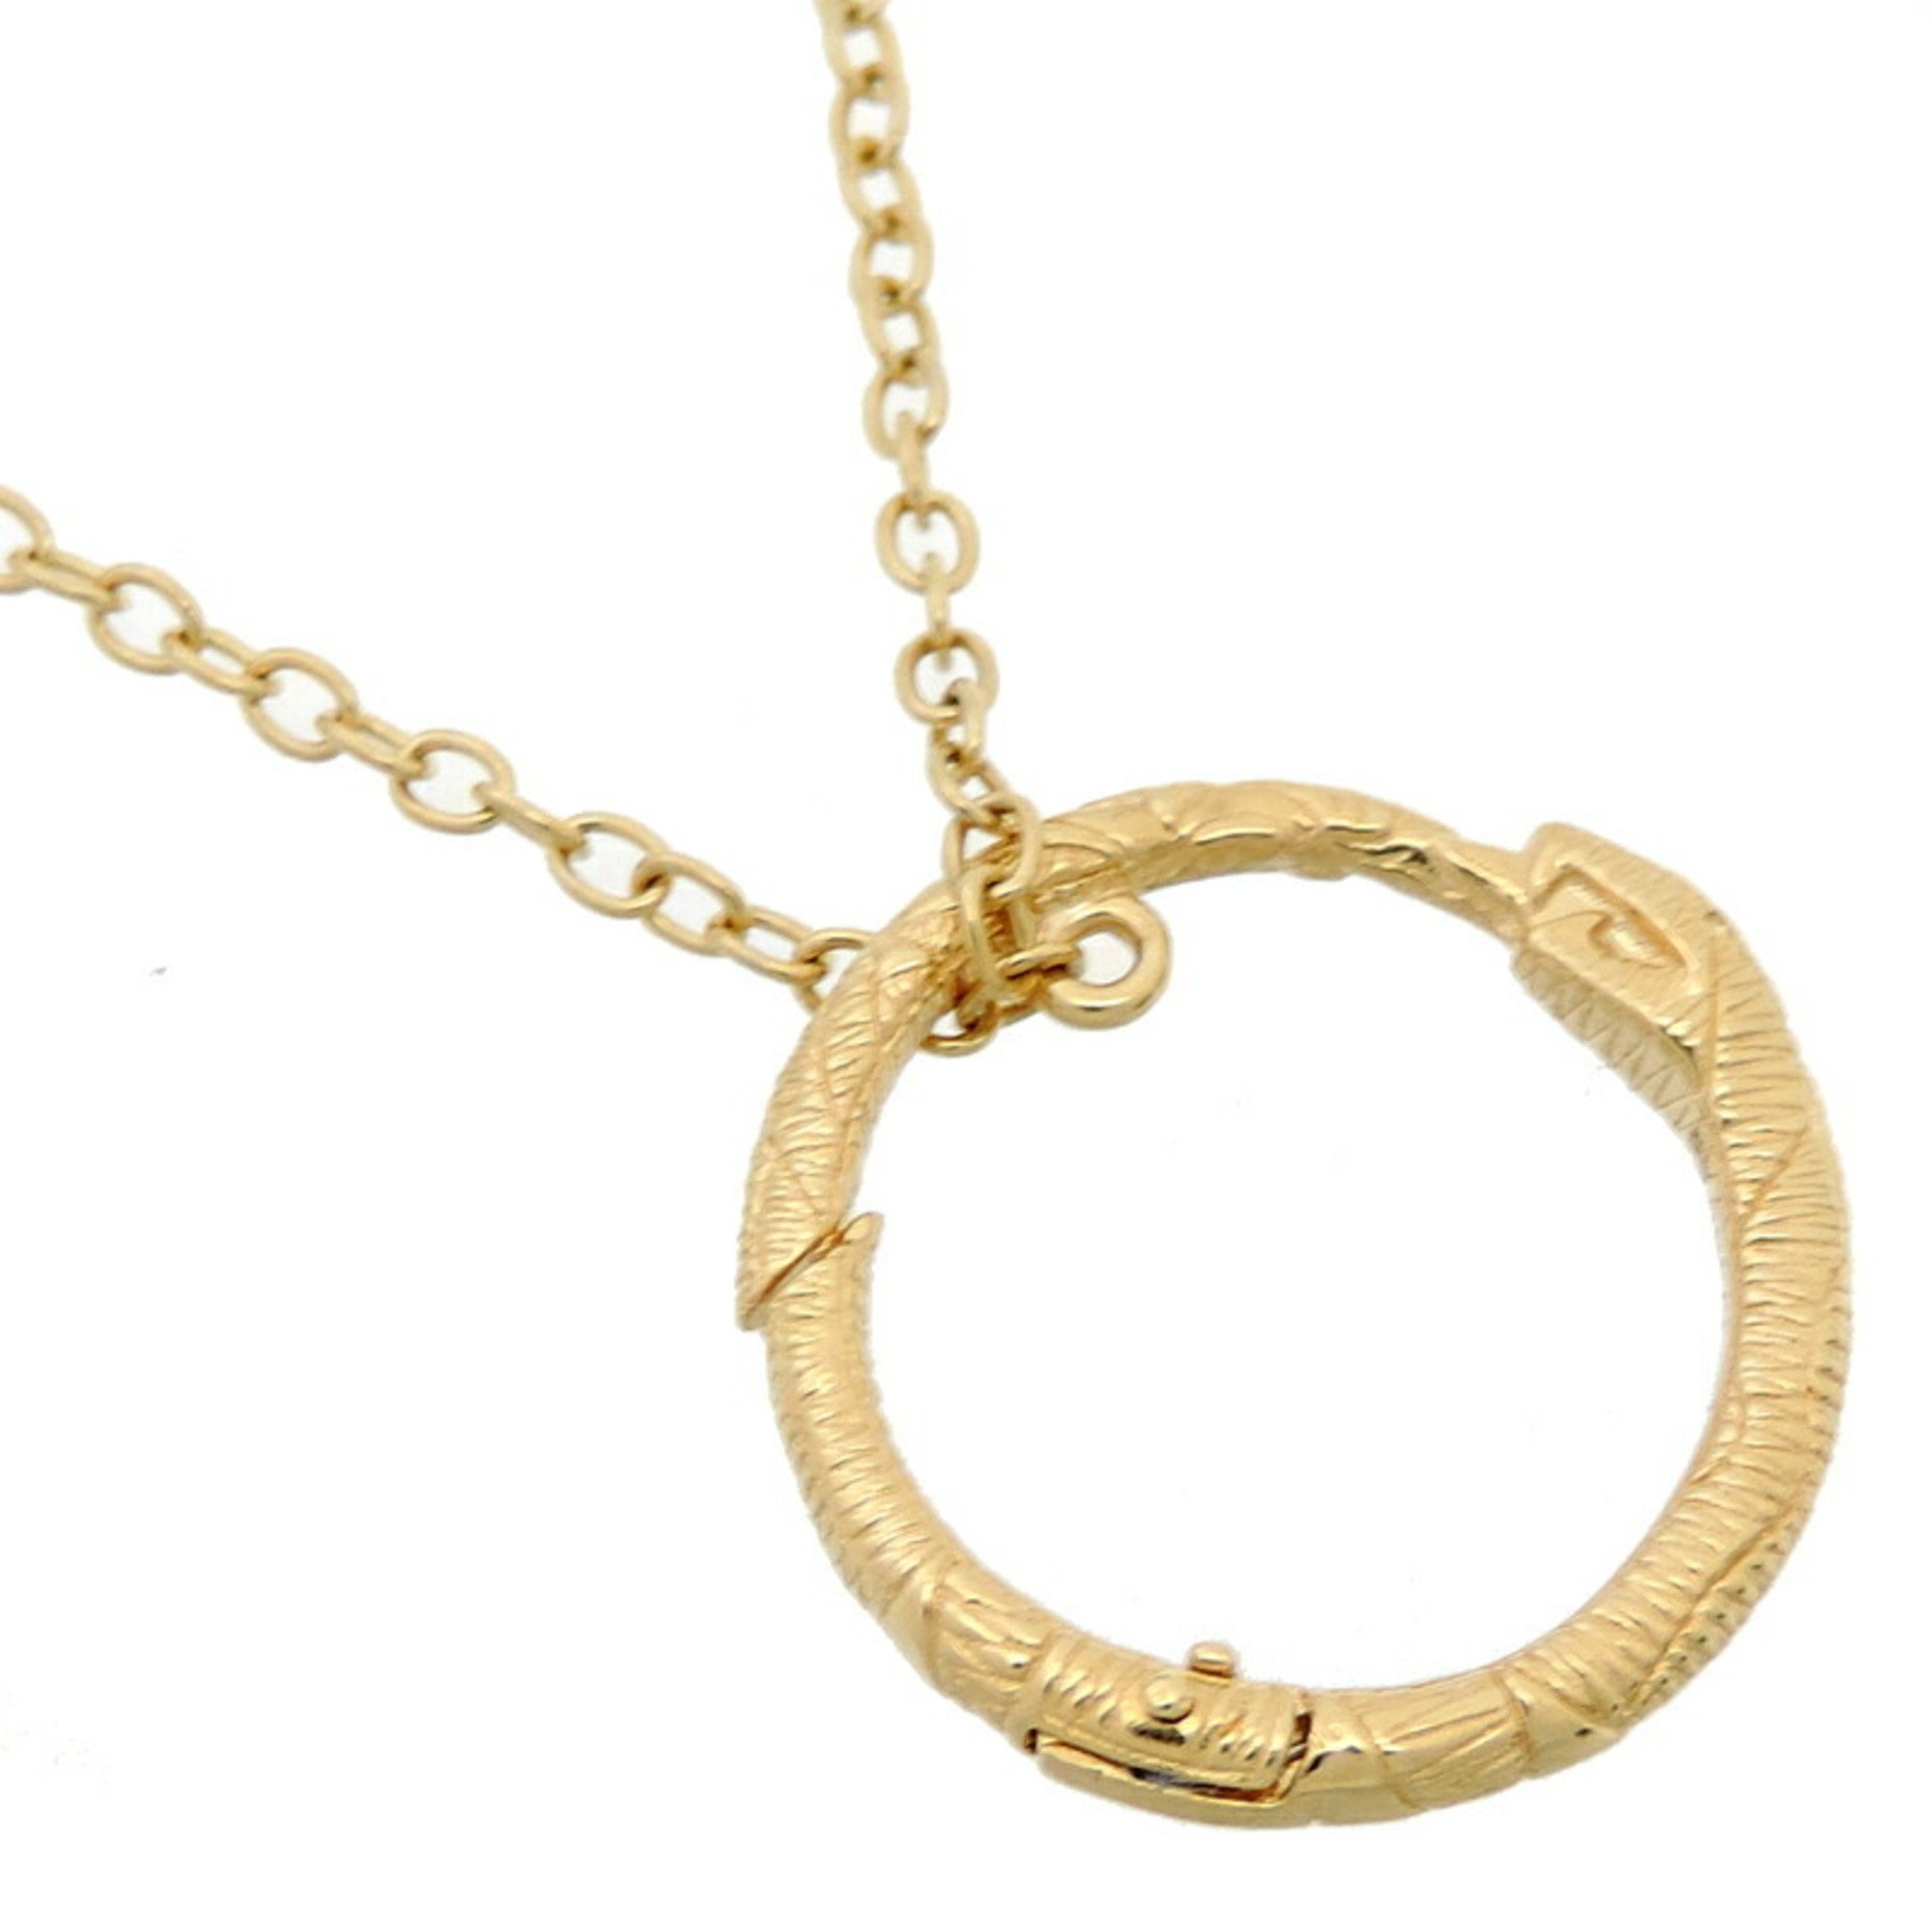 Gucci Ouroboros Women's and Men's Necklace 750 Yellow Gold